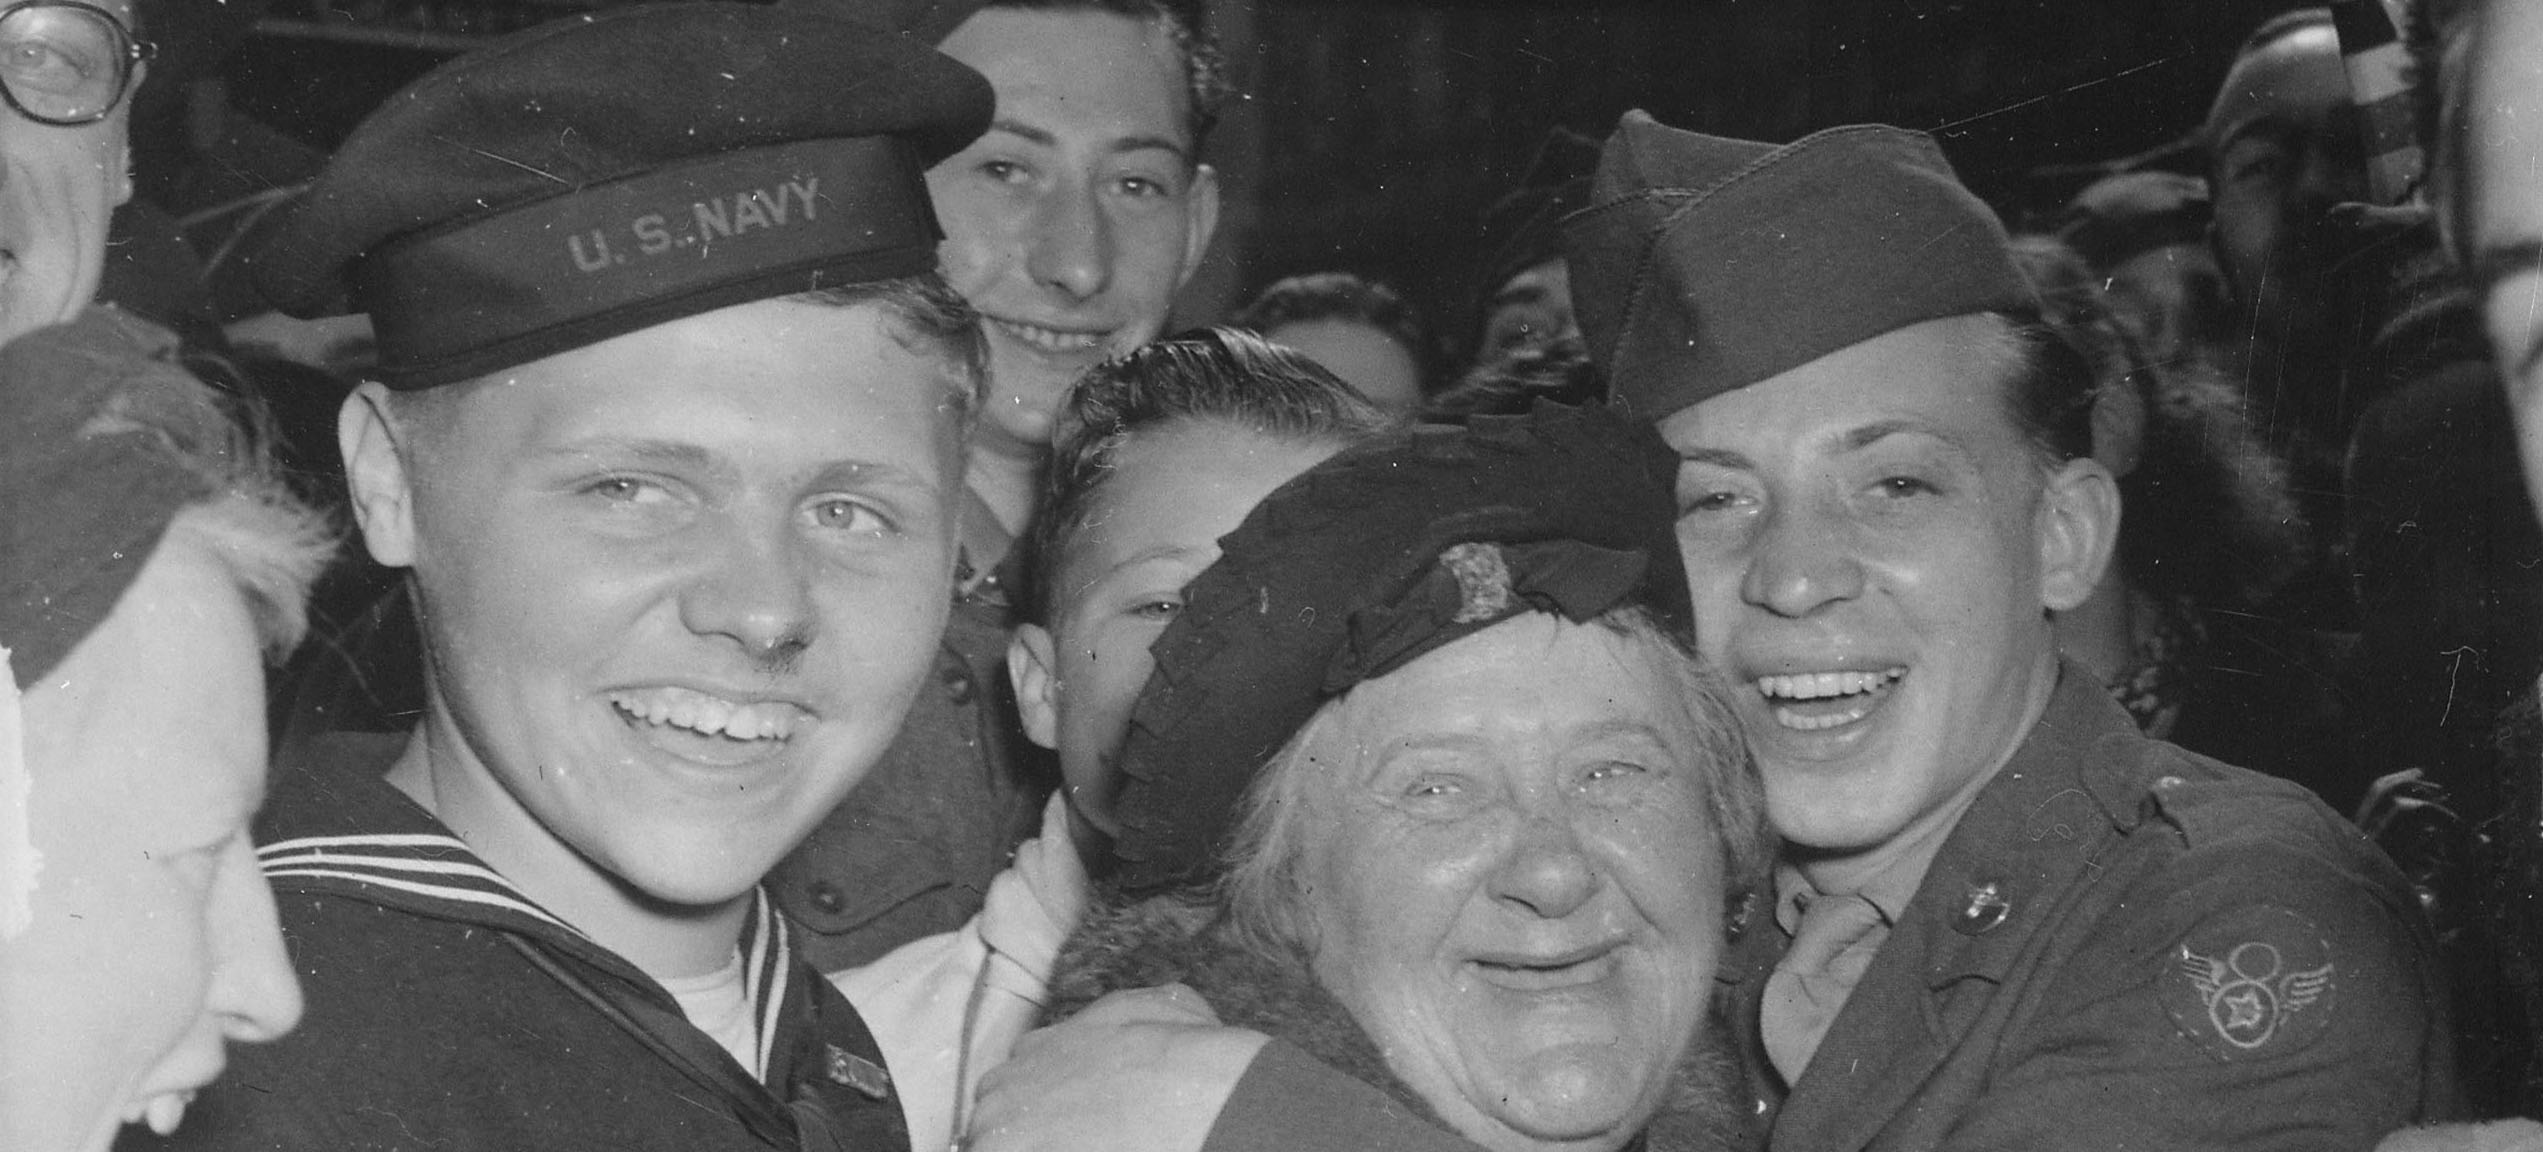 Jubilant American soldiers, seamen and civilians celebrating Germany's unconditional surrender at London, England, May 7, 1945